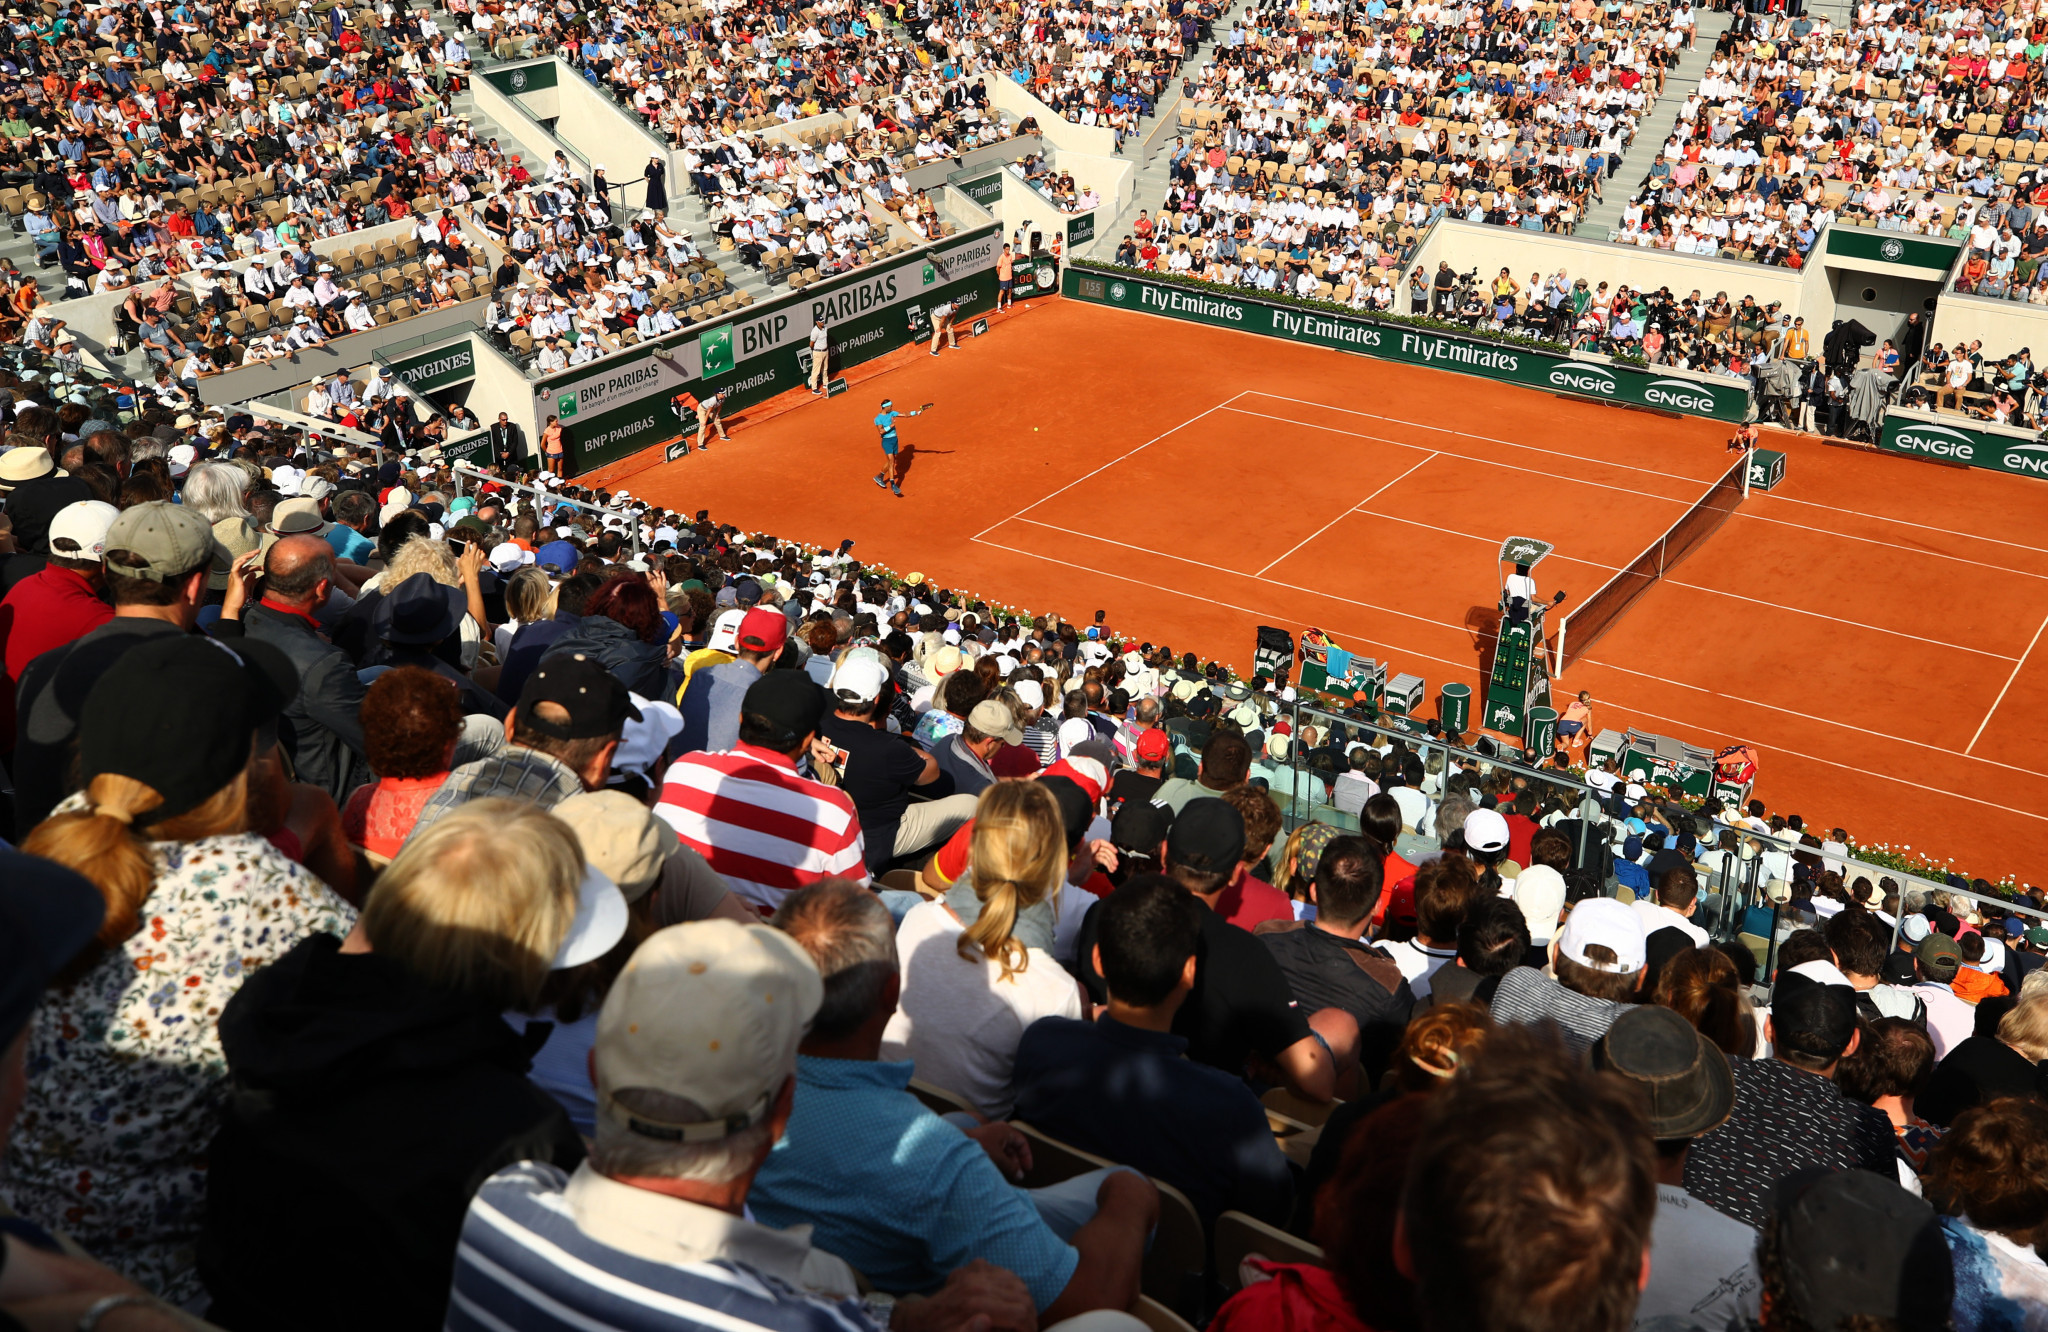 The 2020 French Open will require spectators to leave seats between them as part of safety measures ©Getty Images